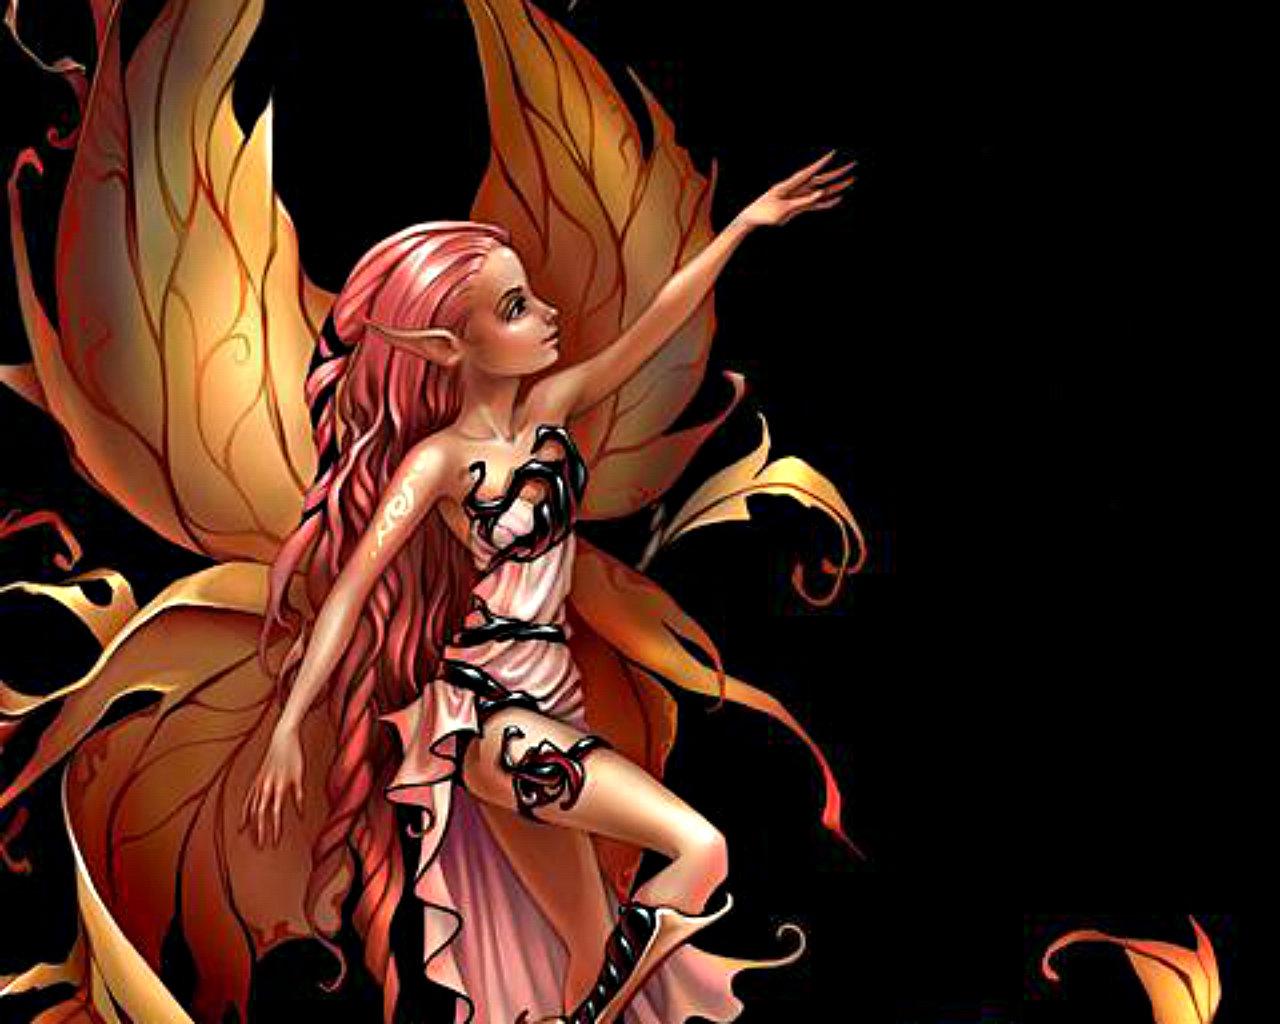 Autumn Fairy High Quality And Resolution Wallpaper On